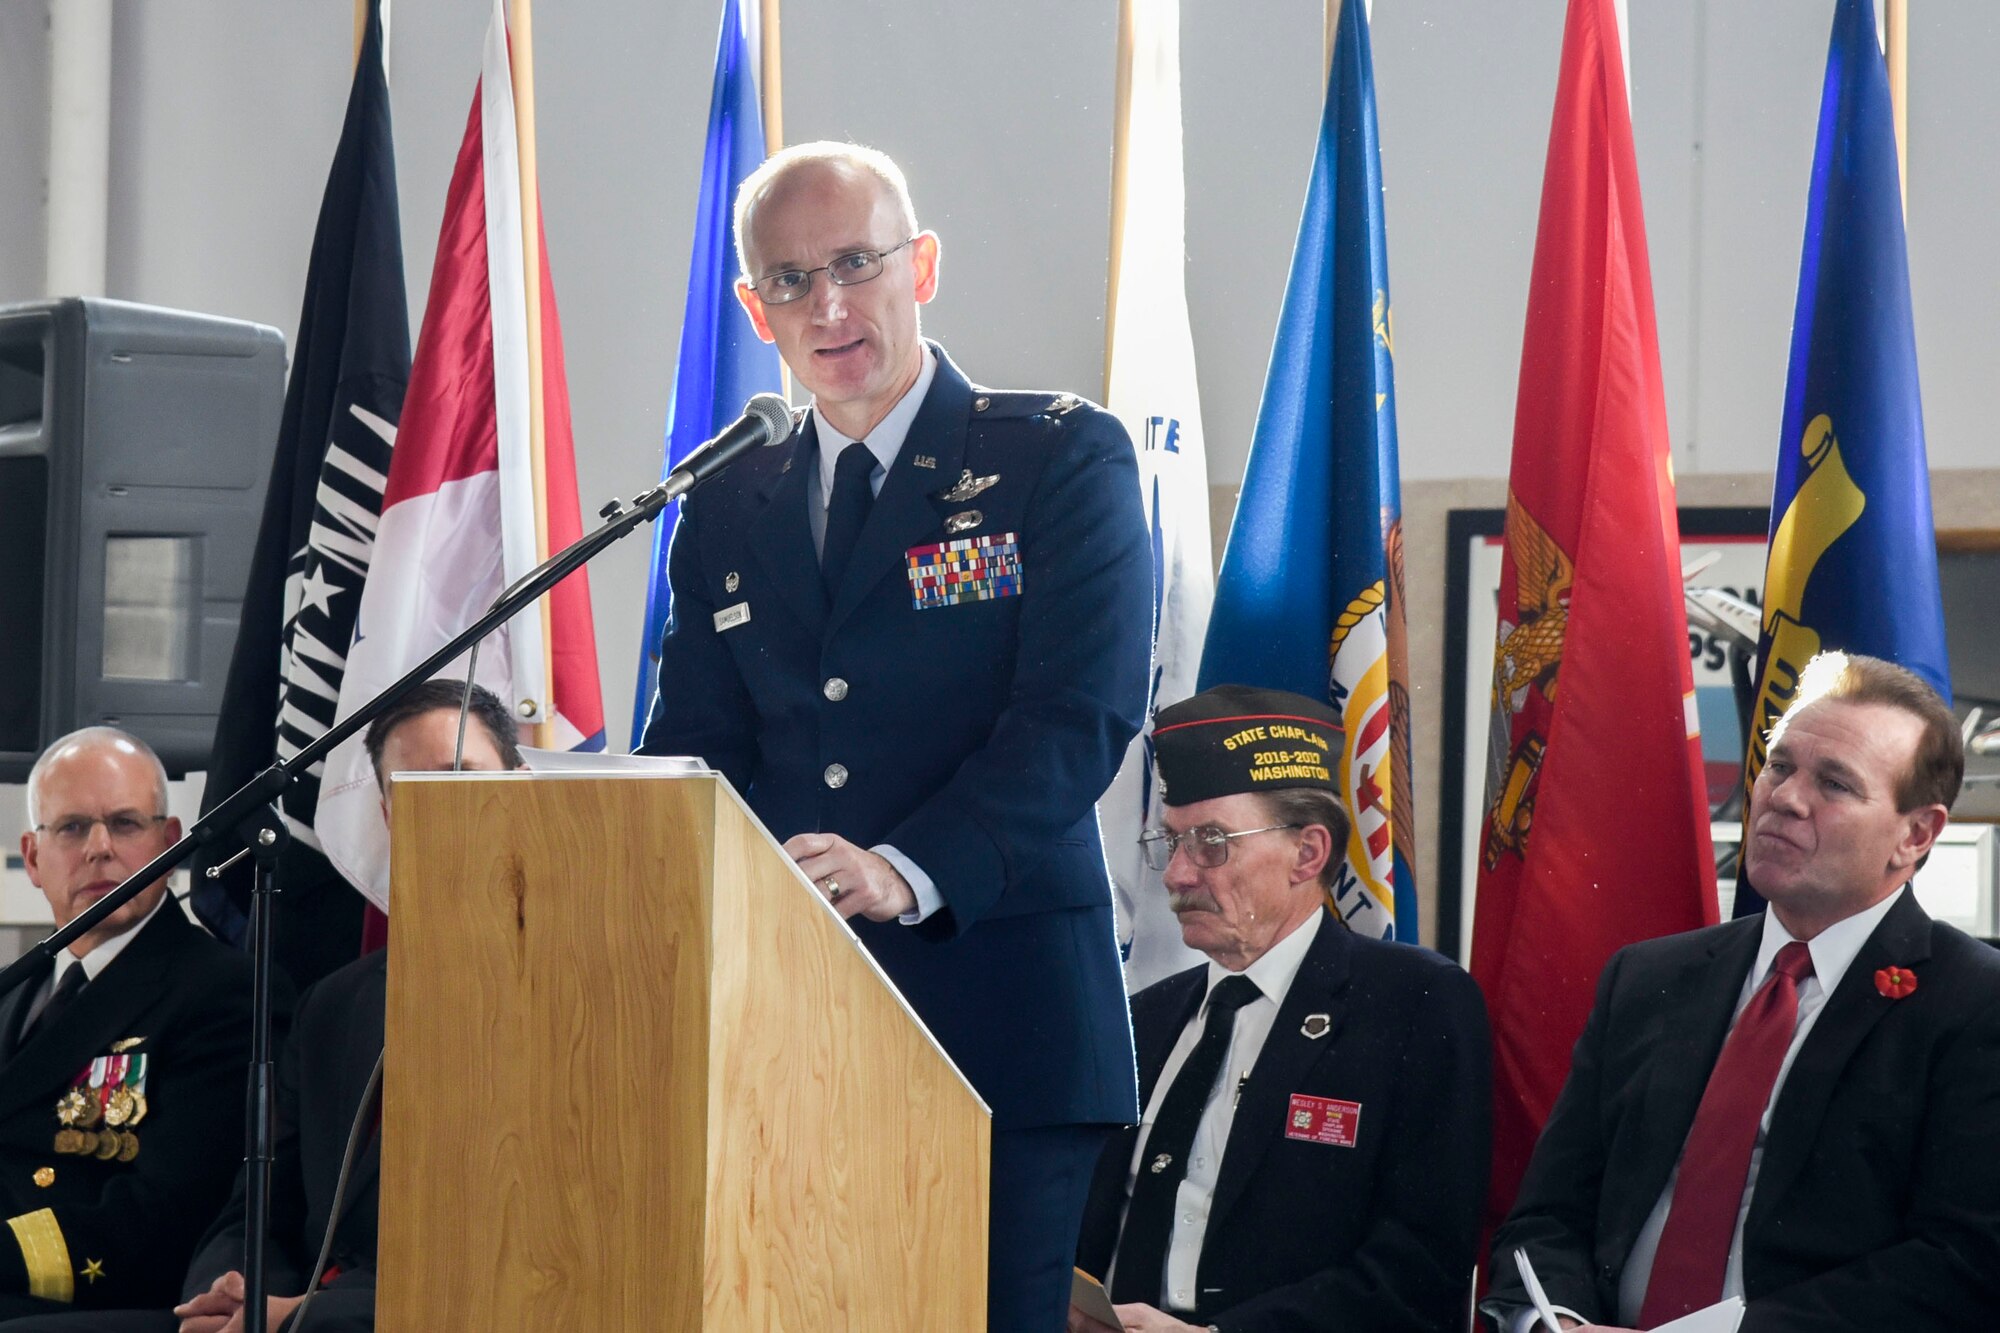 Col. Ryan Samuelson, 92nd Air Refueling Wing commander, speaks during a Veterans Day event Nov. 11, 2016 at Felts Field Honor Point Museum, Spokane. The event was to honor all veterans and included speeches from the Honorable David Condon, Mayor of Spokane, and the keynote speaker Rear Adm. Doug Asbjornsen, U.S. Naval Air Reserve. This was the first year the event was held at the new Honor Point Museum and had more than 600 people in attendance. (U.S. Air Force photo/Airman 1st Class Taylor Shelton)
